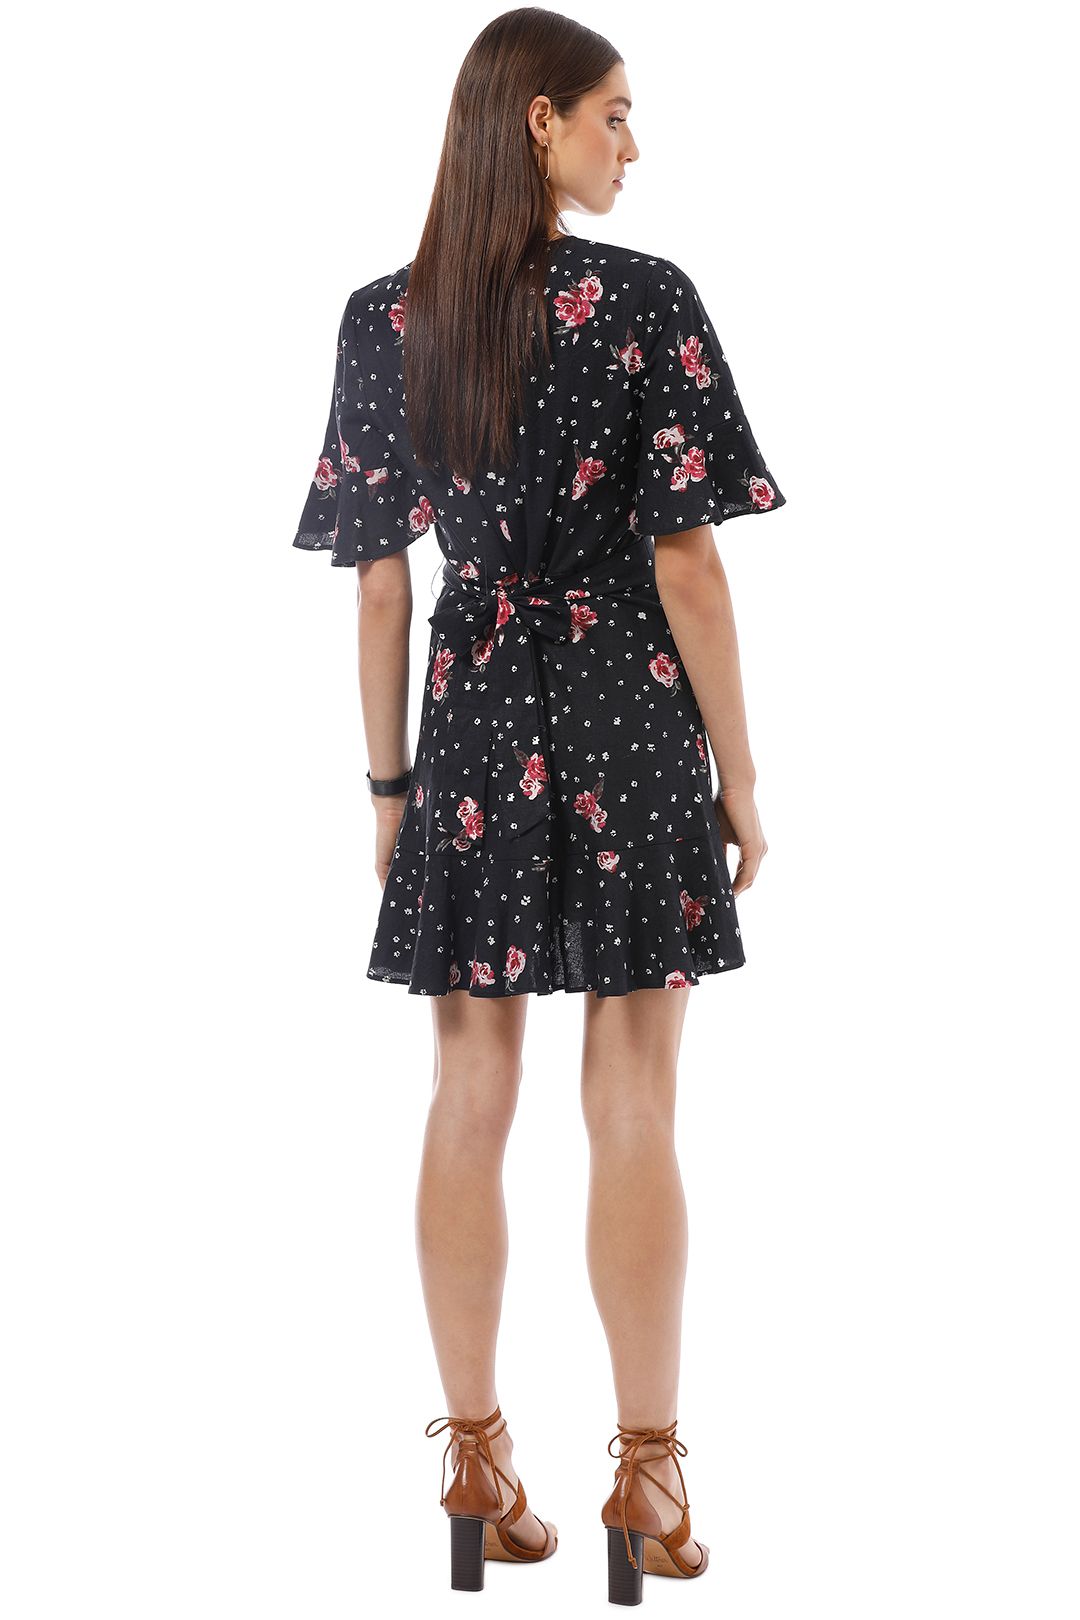 Rodeo Show - Midnight Dress - Black Floral - Back